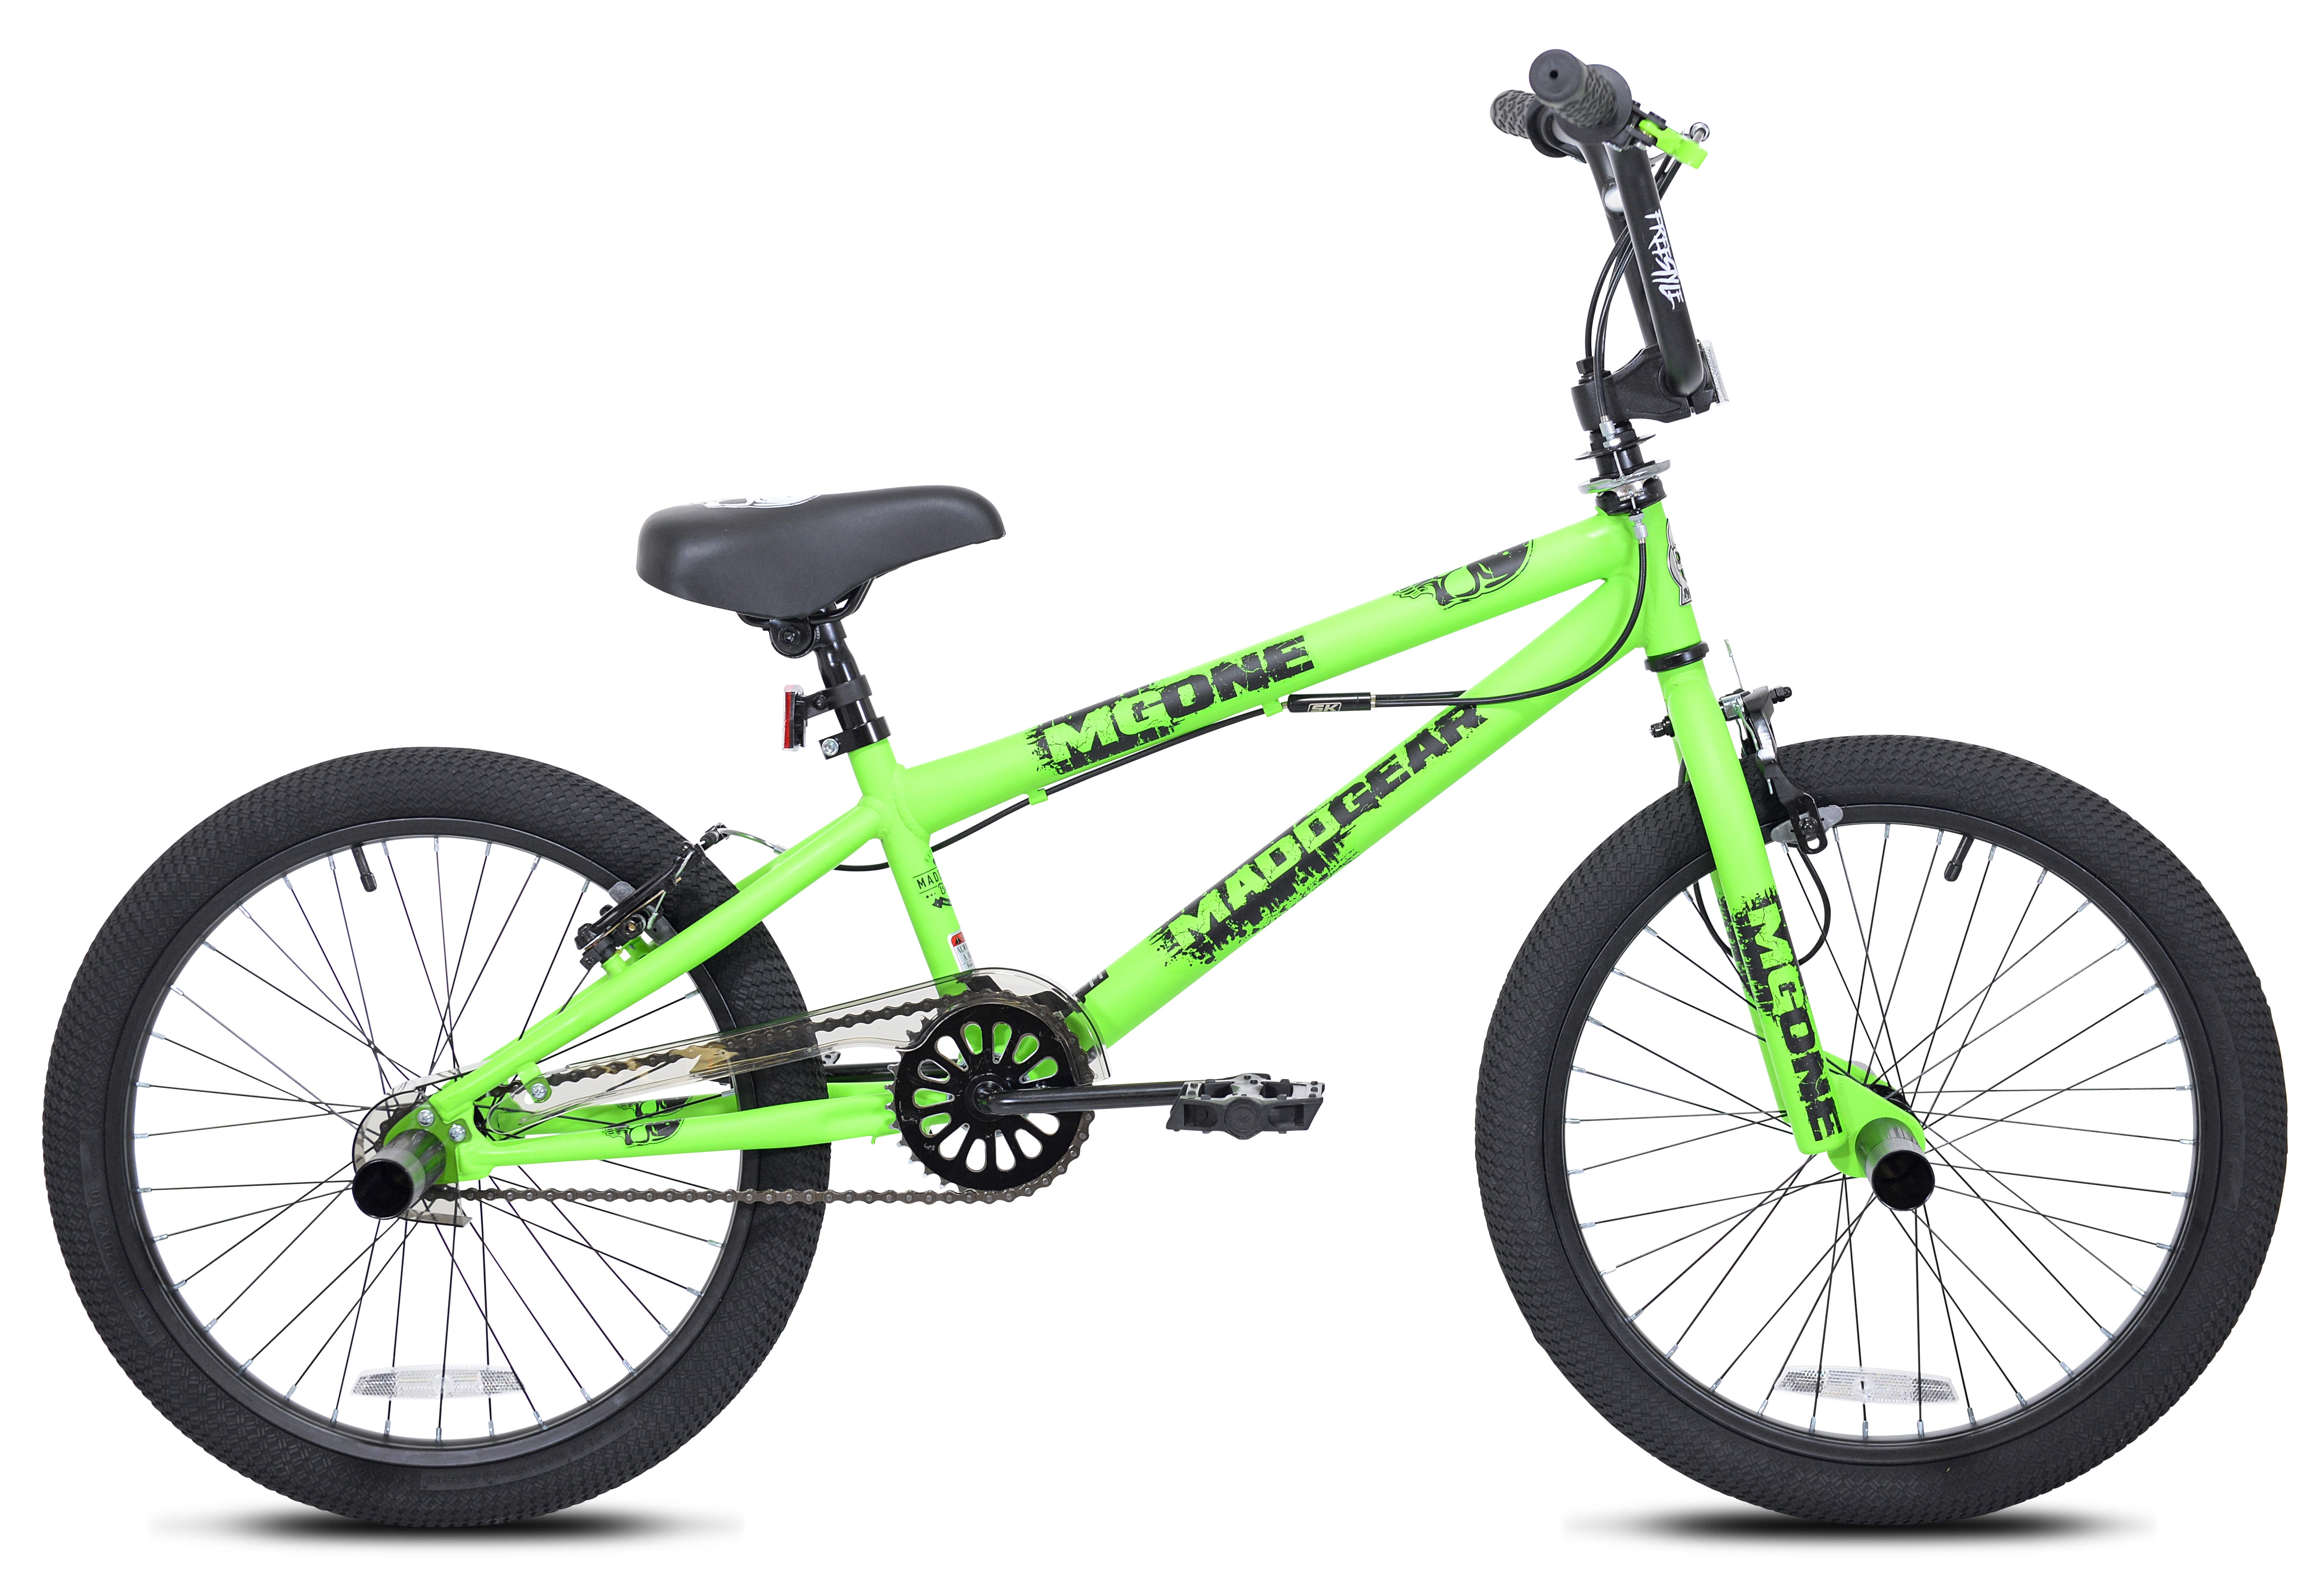 koepel software zuigen Kent Bicycles 20 in Madd Gear Freestyle BMX Boy's Bicycle, Neon Yellow -  Walmart.com